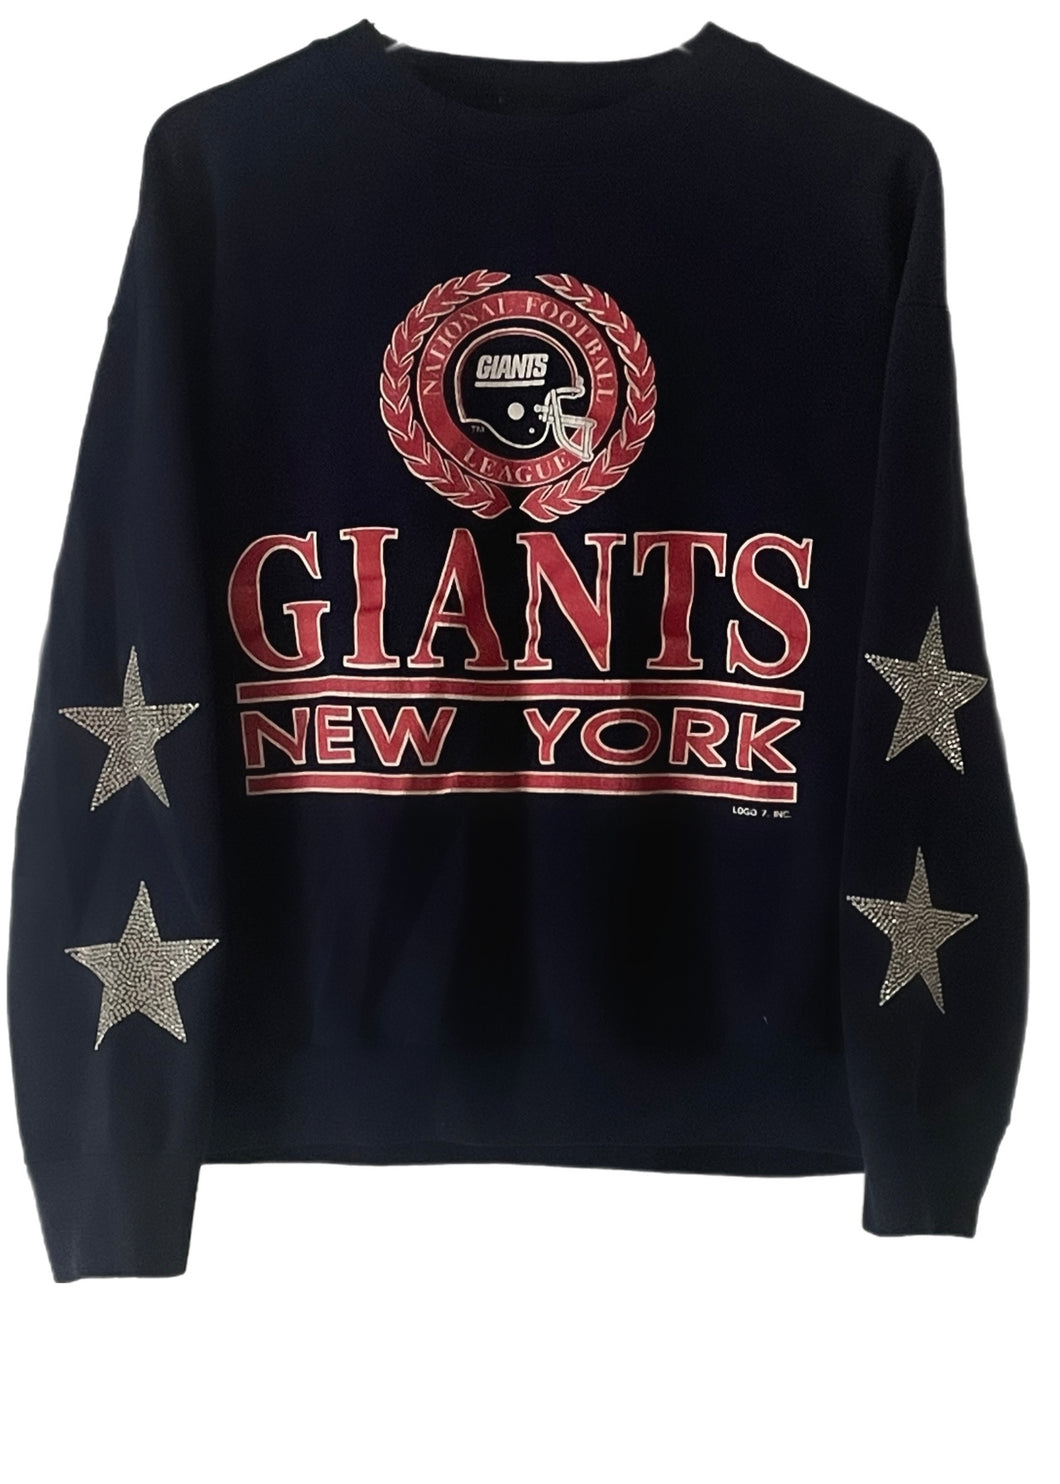 NY Giants, NFL One of a KIND Vintage Sweatshirt with Crystal Star Design.